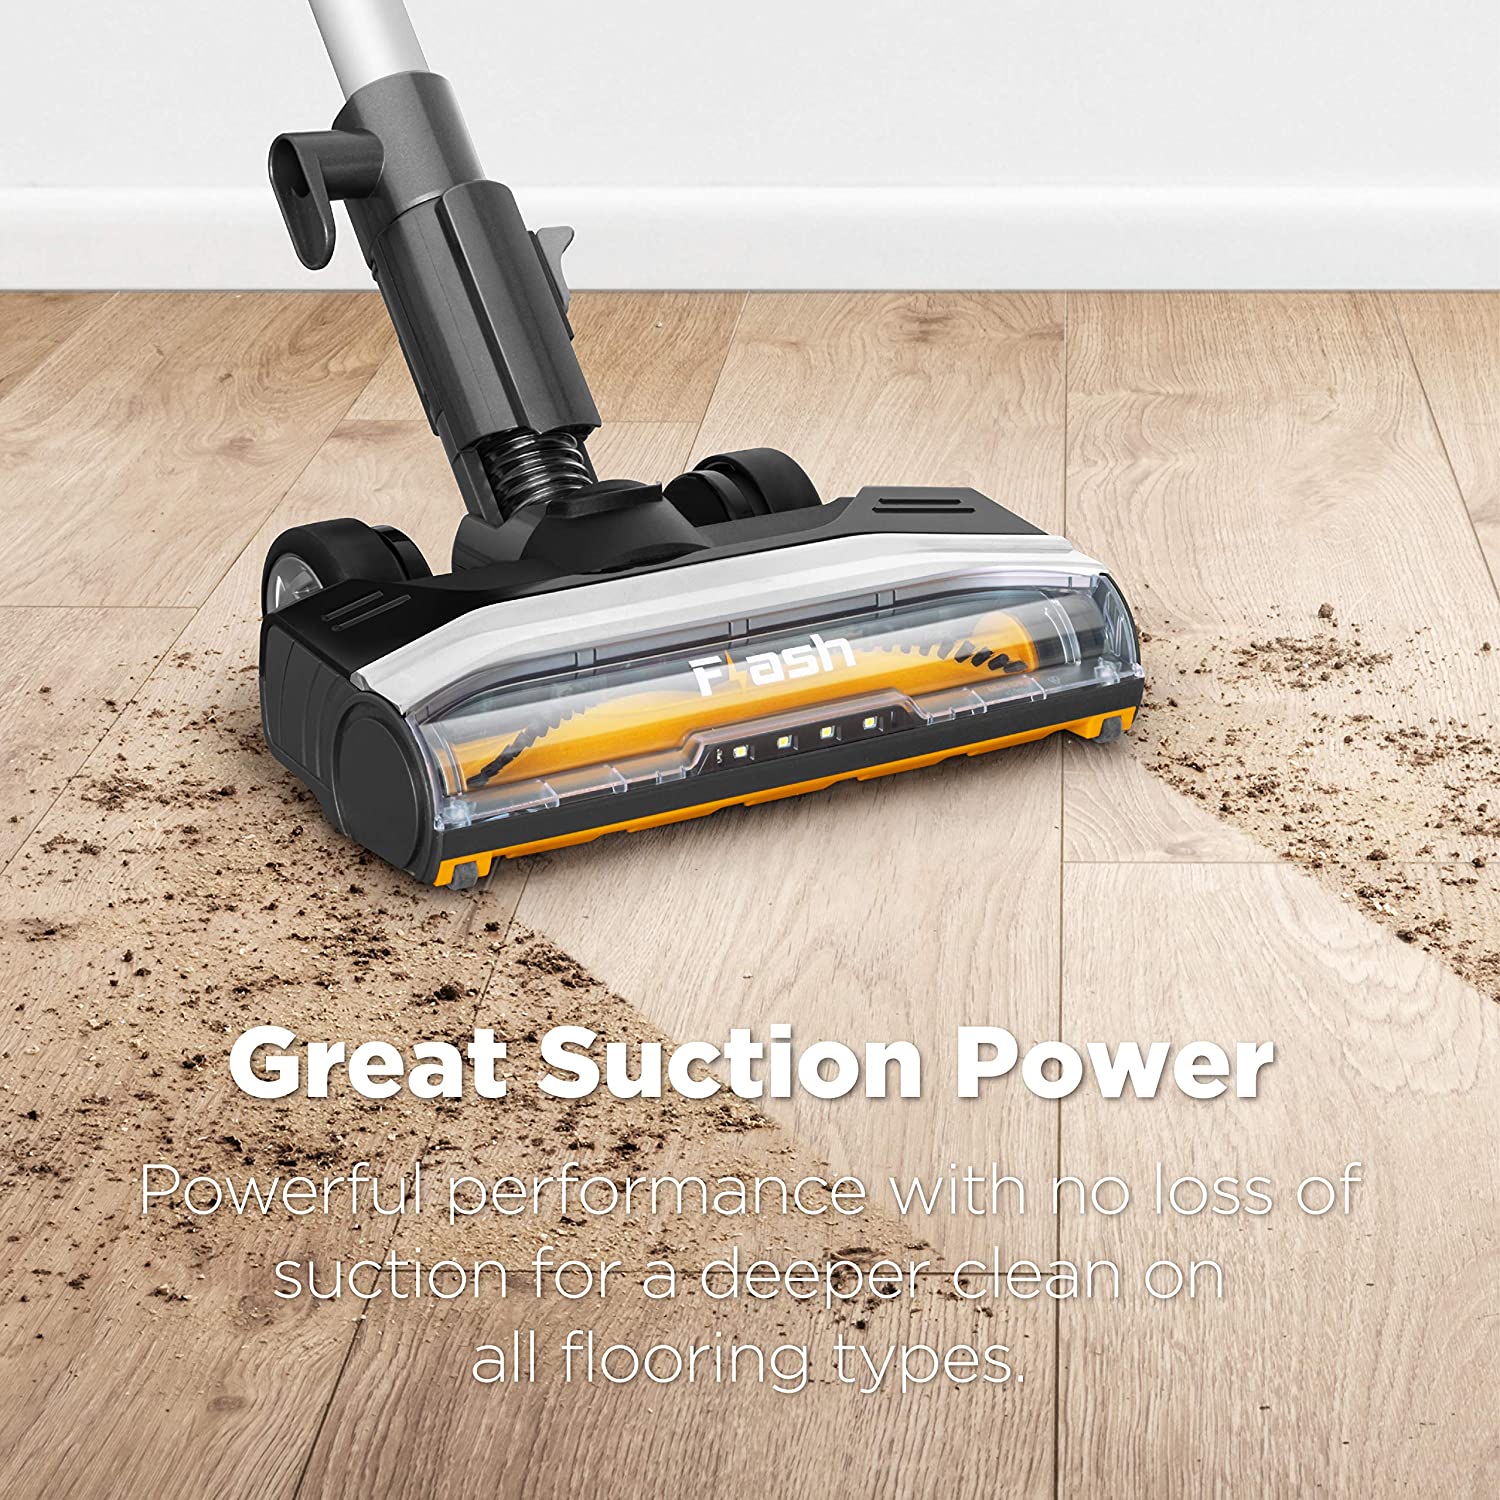 11 Best Vacuums For Laminate Floors, What Is The Best Stick Vacuum For Laminate Floors